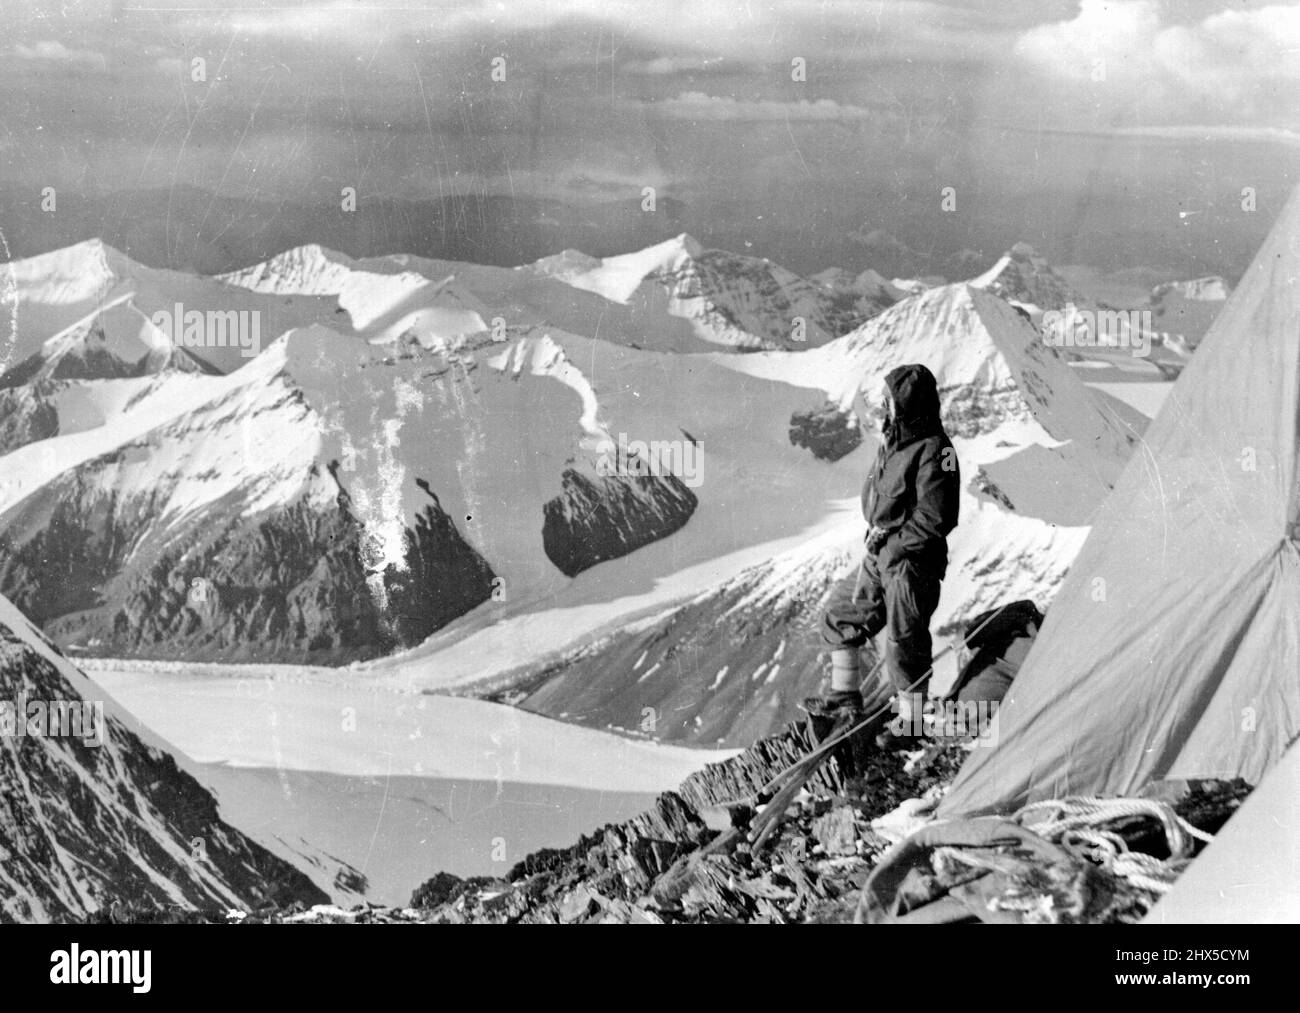 Mount Everest Expedition 1938. July 28, 1938 Stock Photo - Alamy